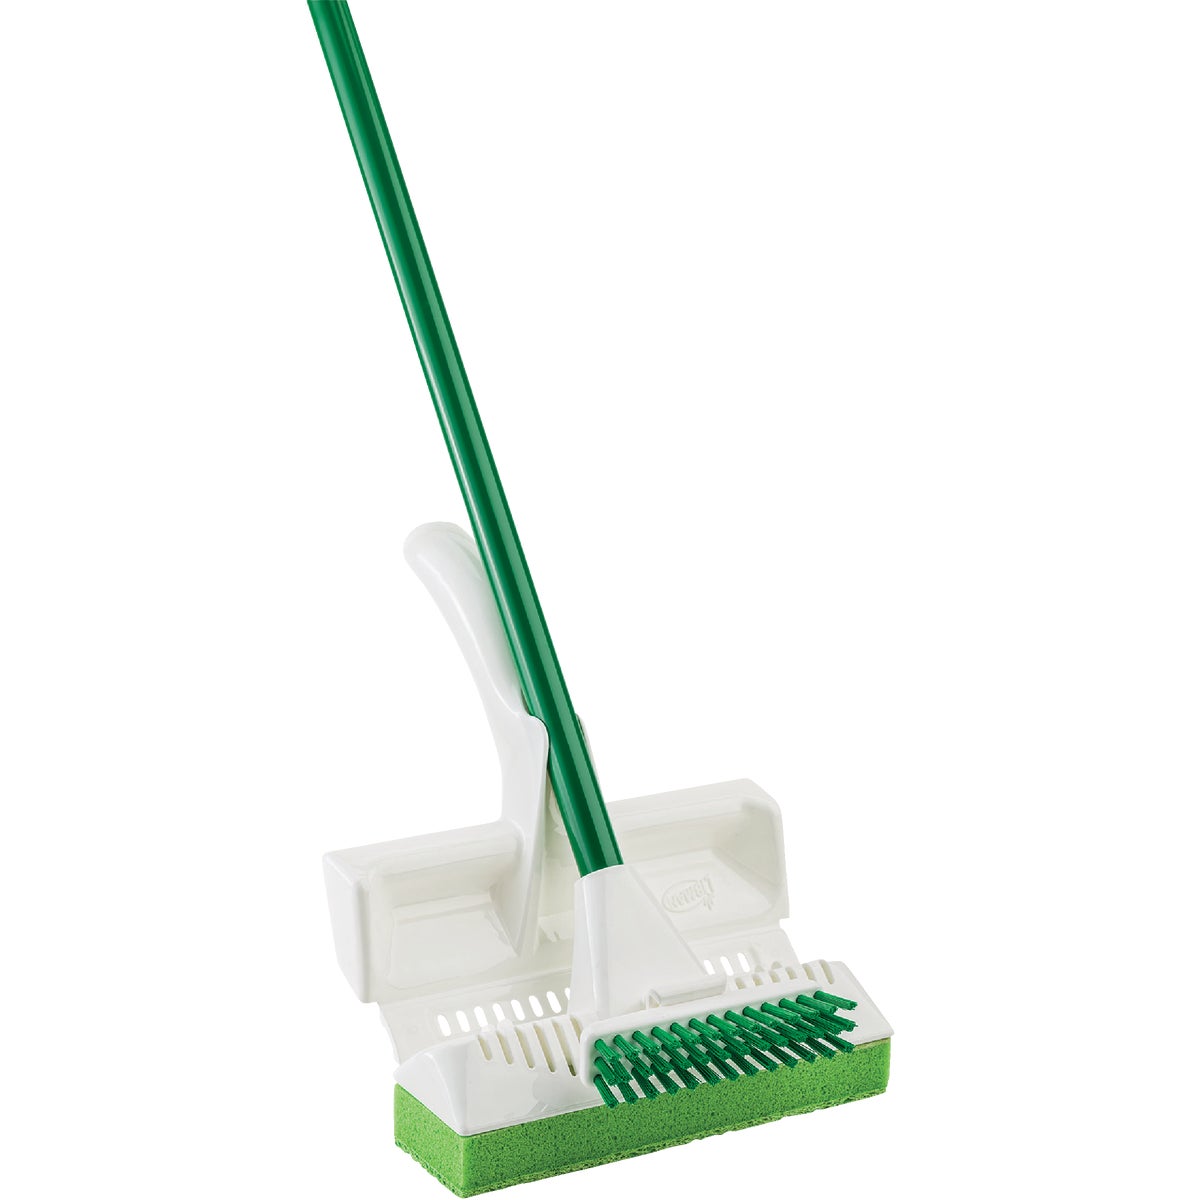 Item 602096, This traditional hinge style sponge mop has a new sleek and modern design 